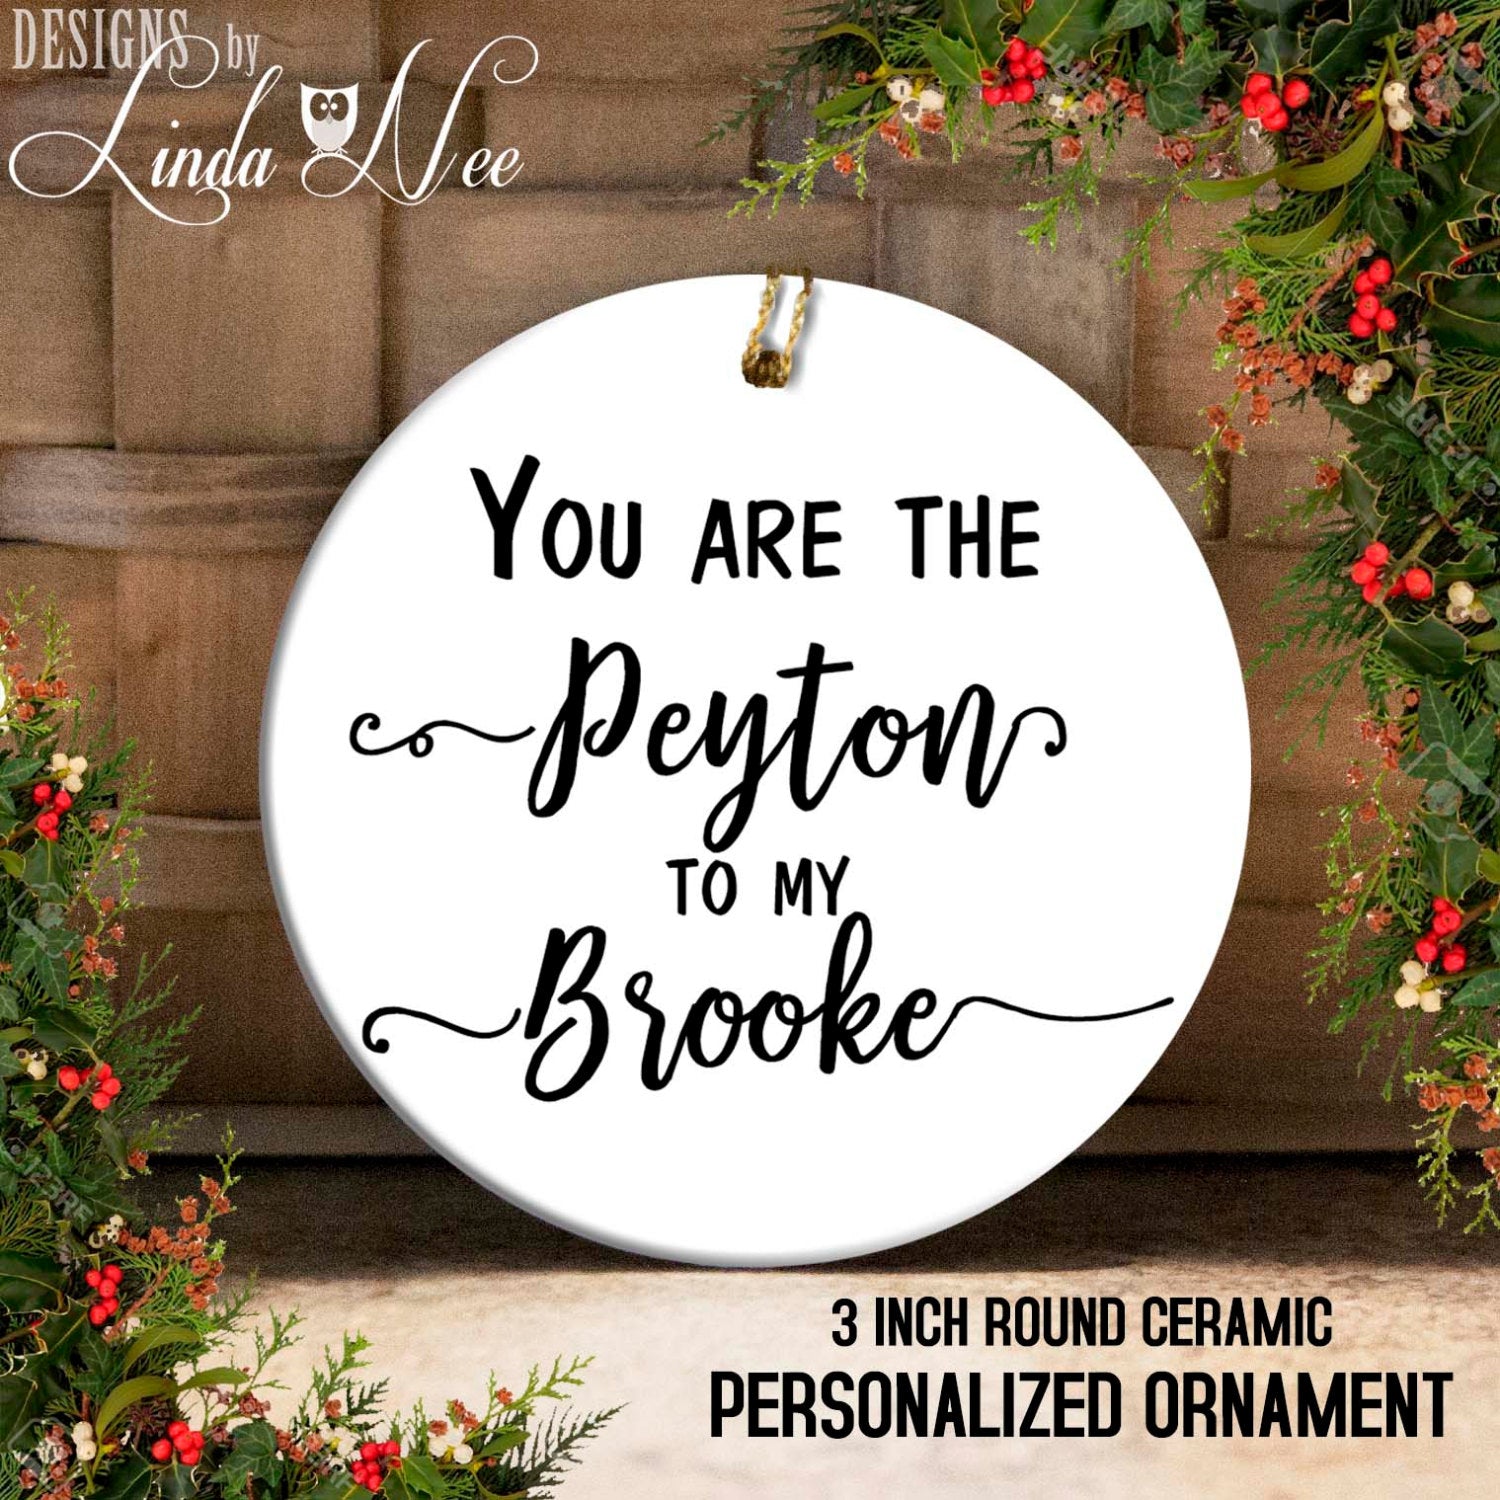 You Are the Peyton to My Brooke Ornament